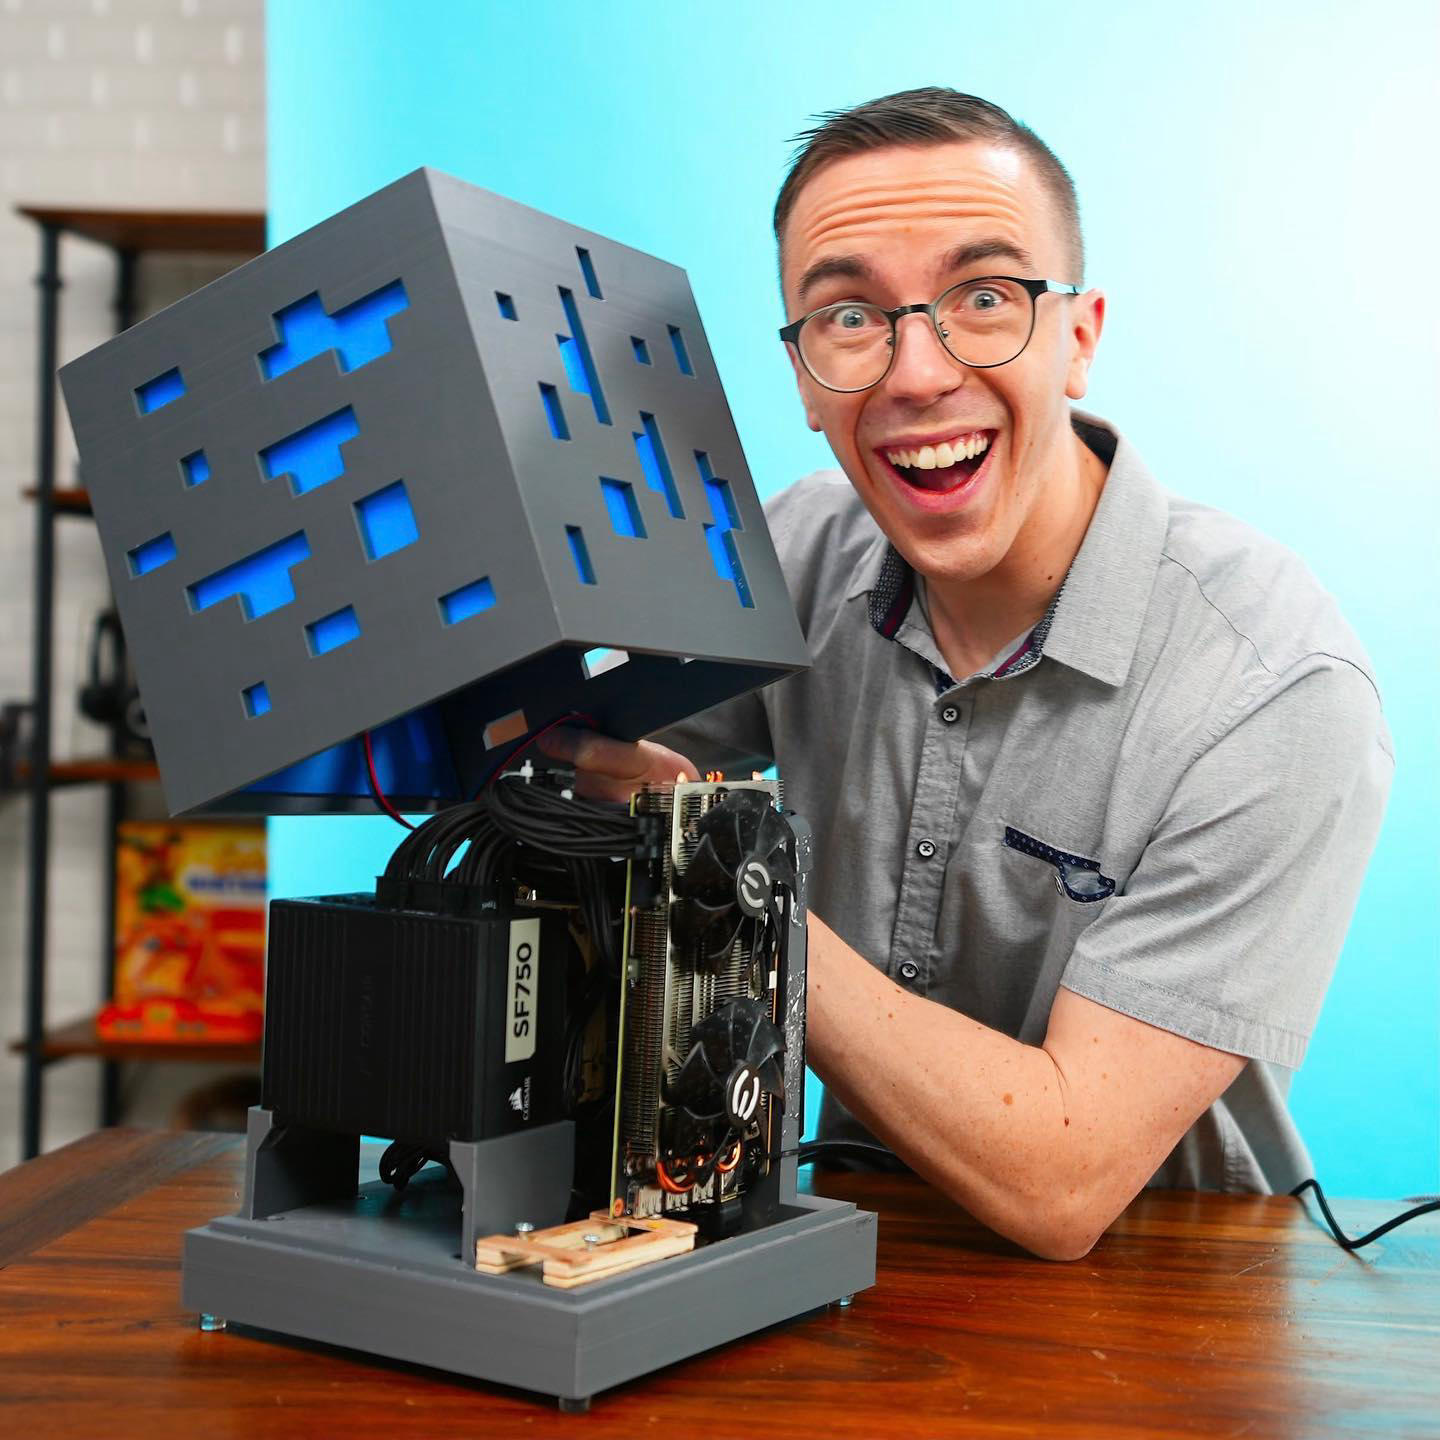 Austin Evans - We built a gaming PC in a fully 3D printed cube